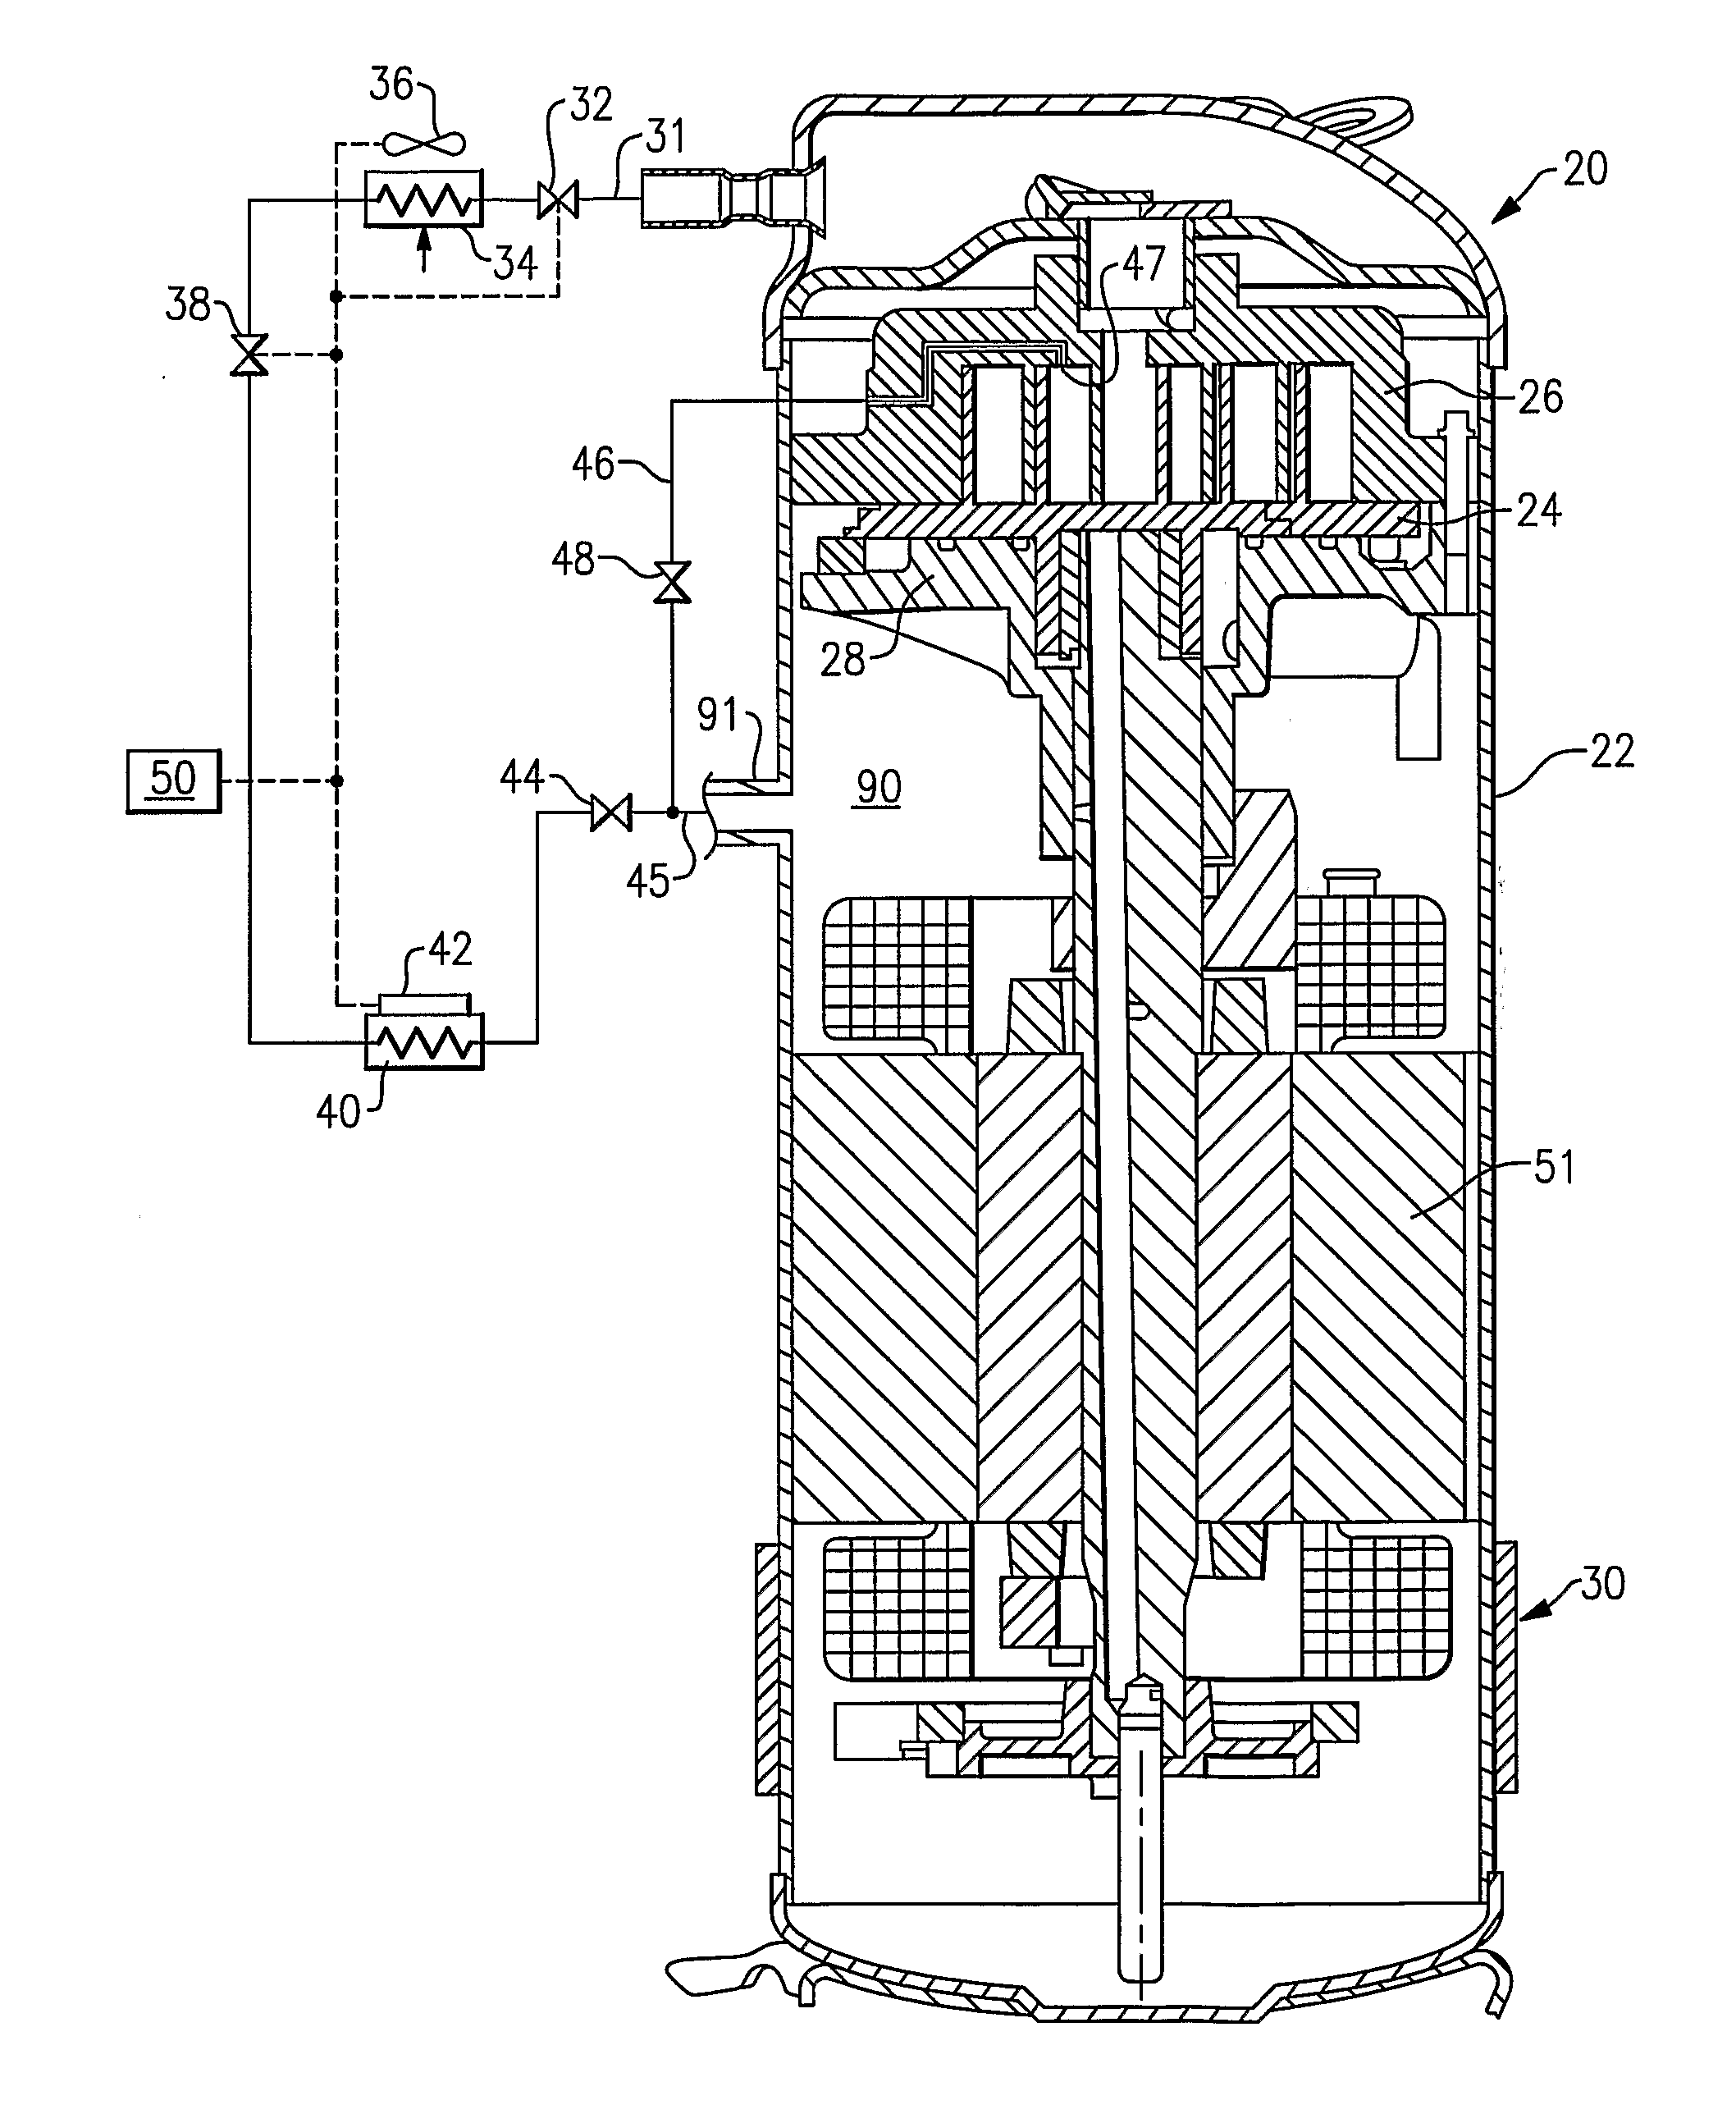 Refrigerant system with control to address flooded compressor operation